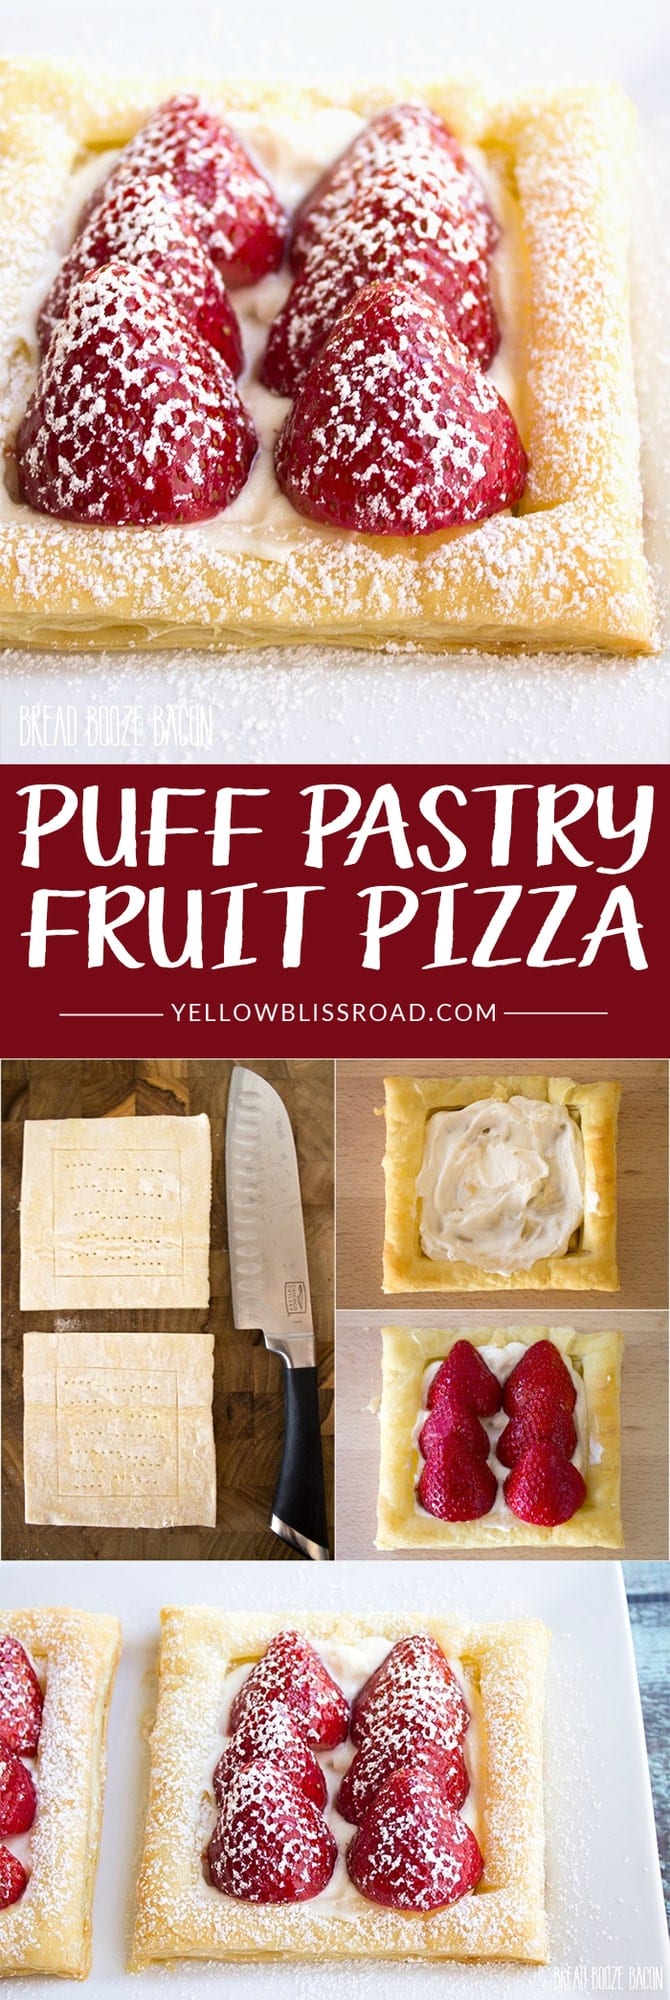 Puff Pastry Fruit Pizza with a creamy no-bake cheesecake filling